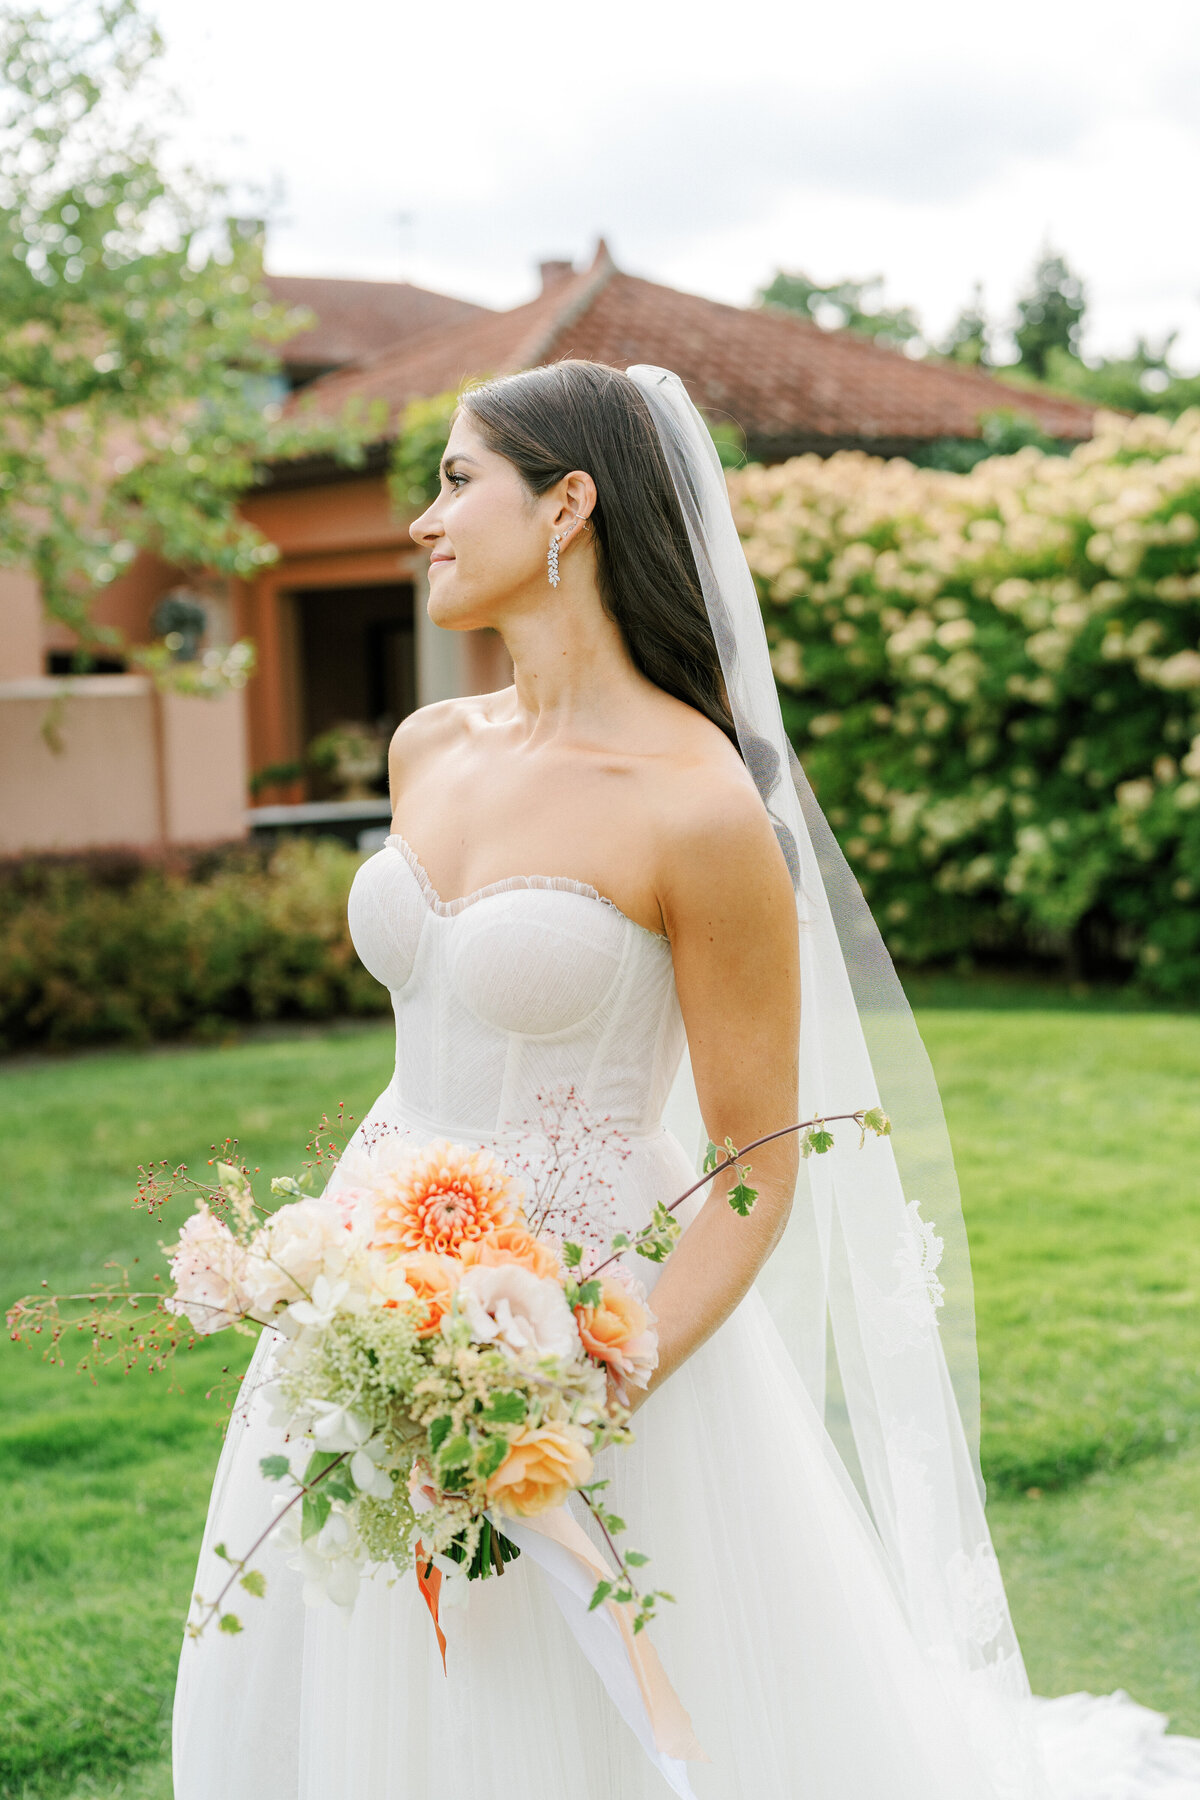 Bridal Photo GLENMERE MANSION WEDDING WEEKEND In Any Event NY